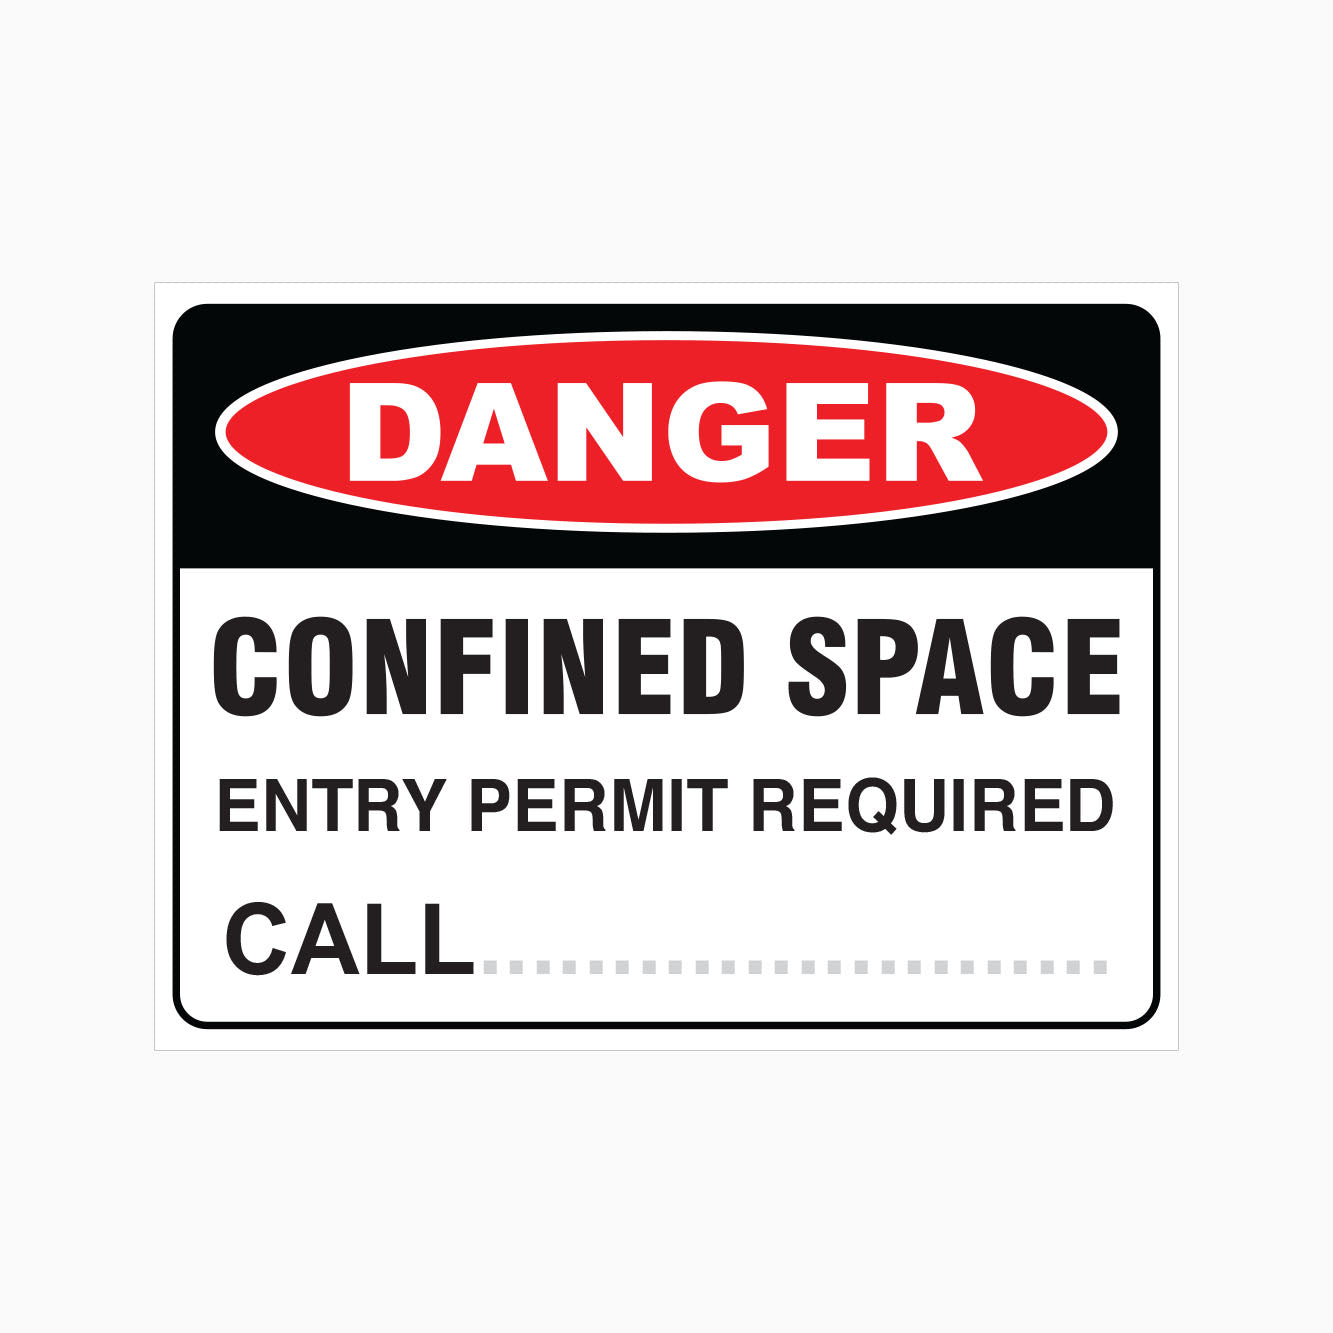 DANGER CONFINED SPACE ENTRY PERMIT REQUIRED CALL WITH CUSTOM NUMBER GET SIGNS